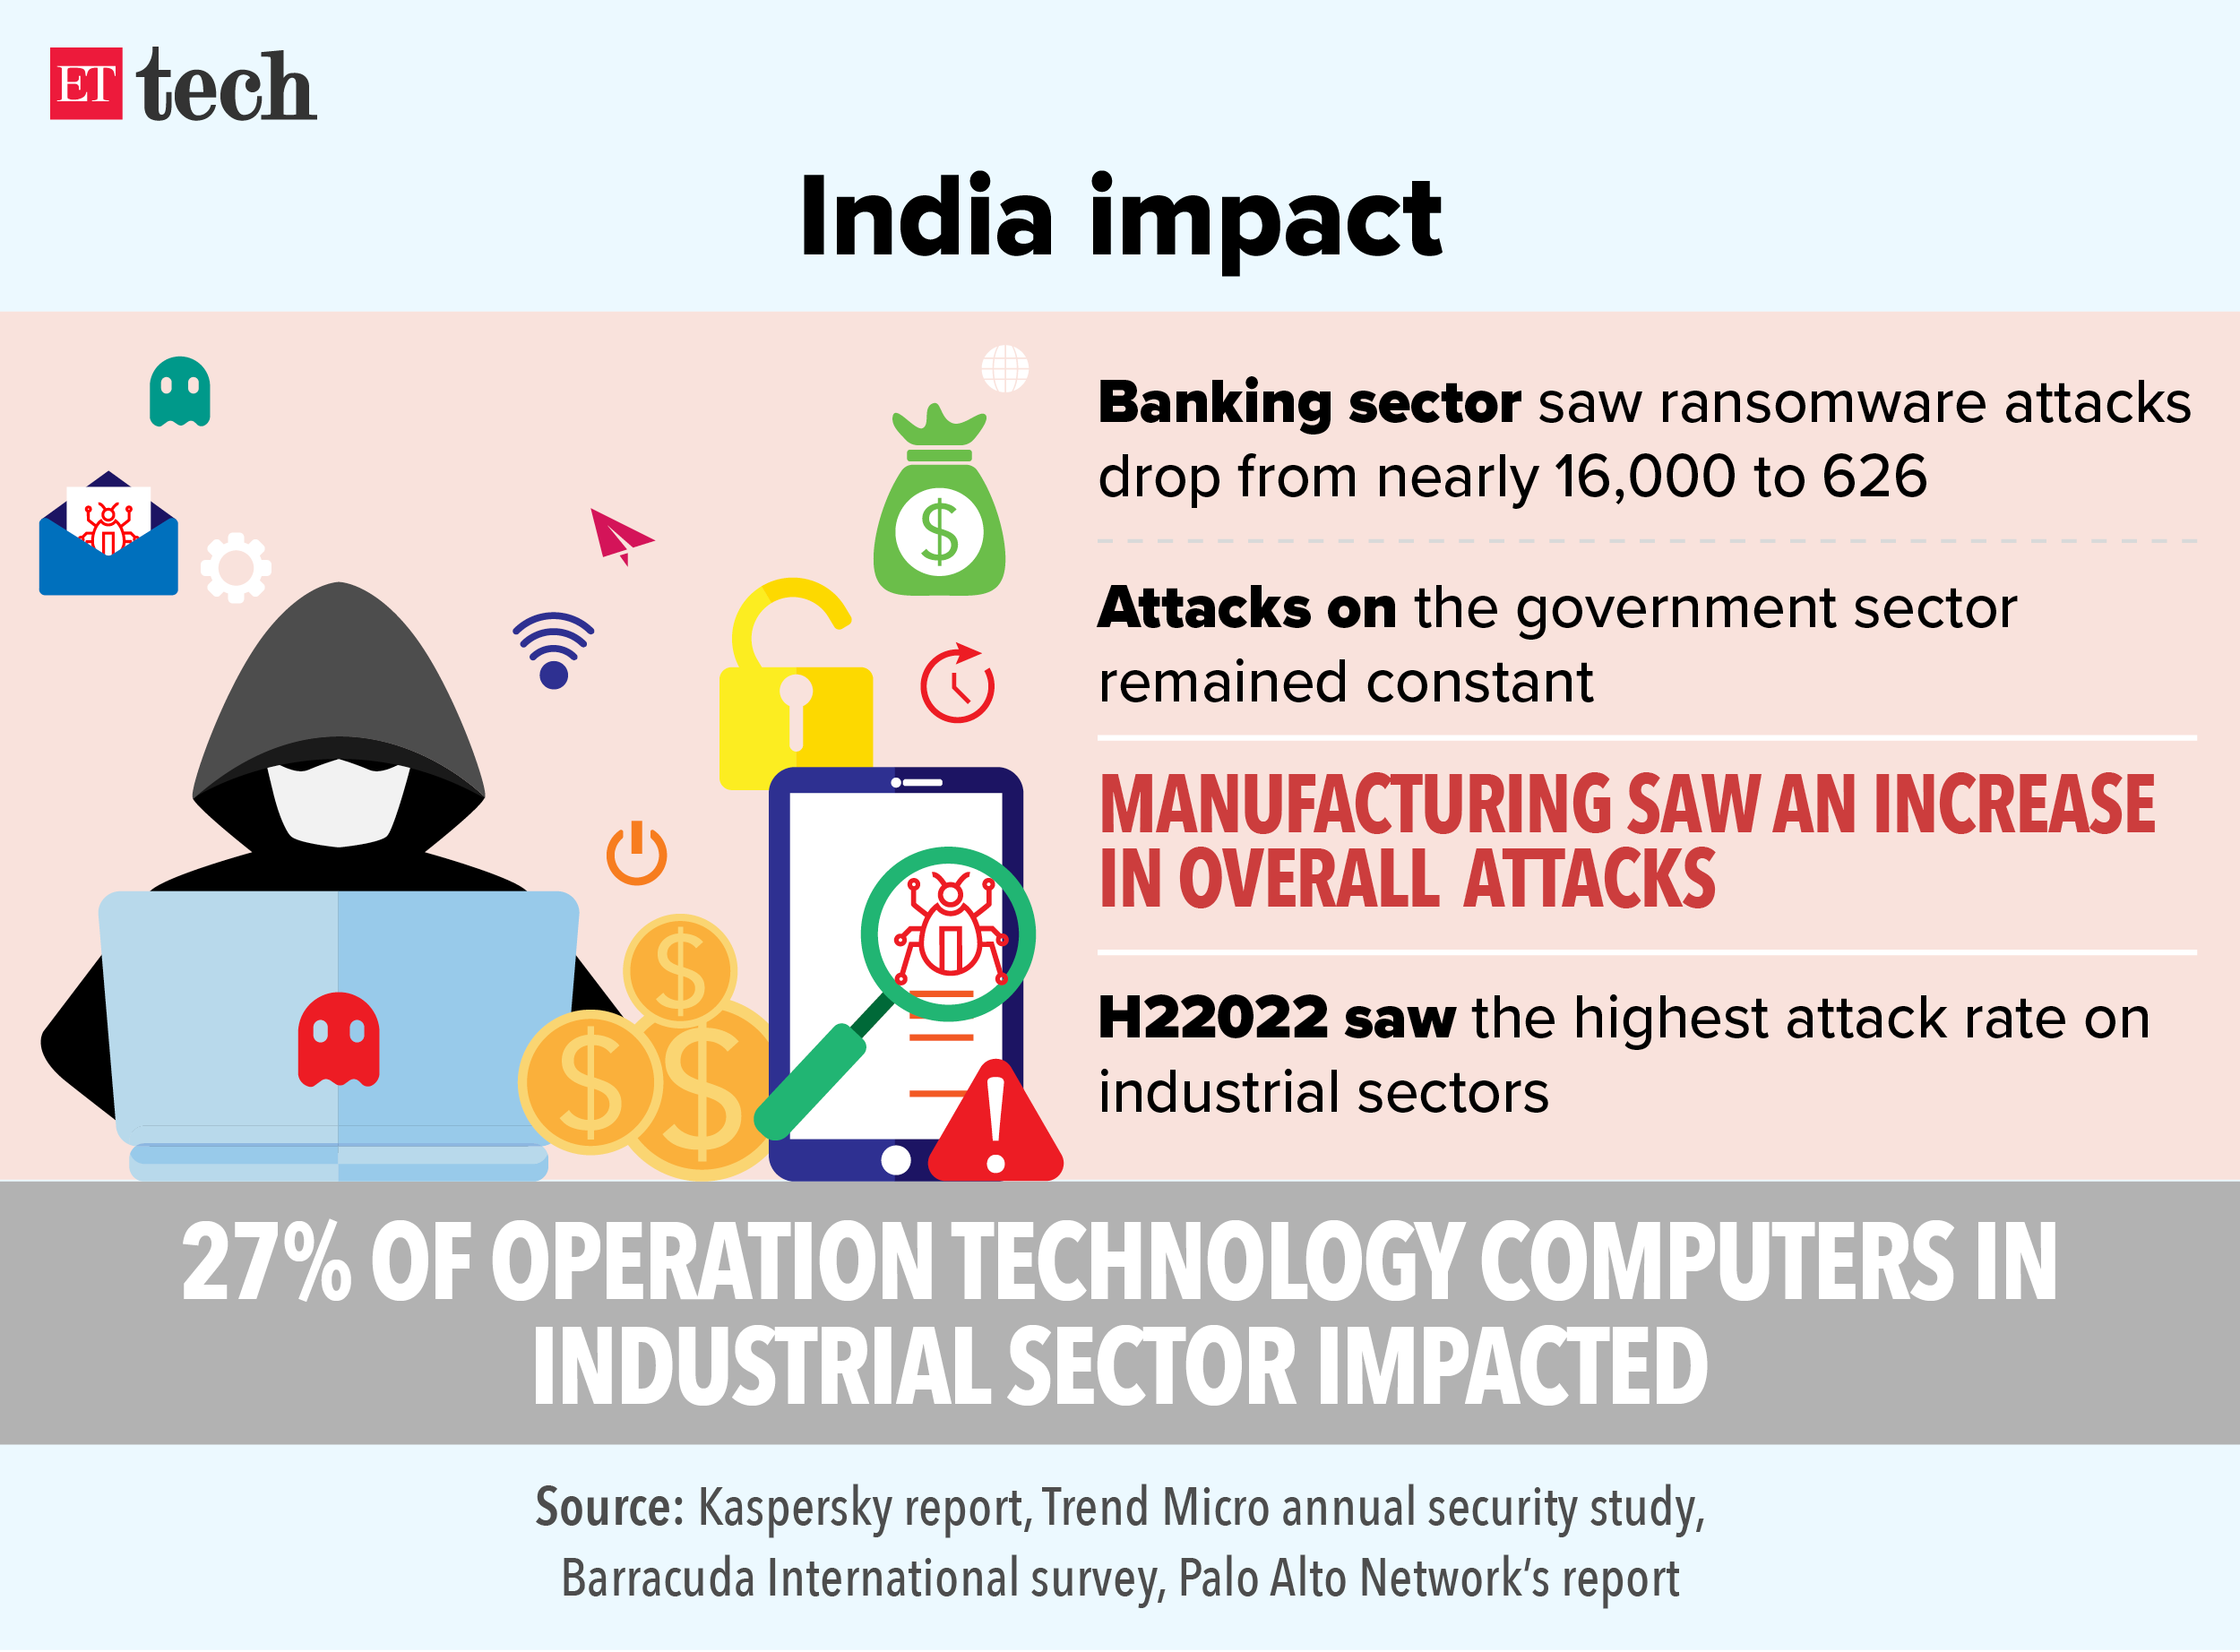 India impact_Ransomware and malware attacks_Graphic_ETTECH